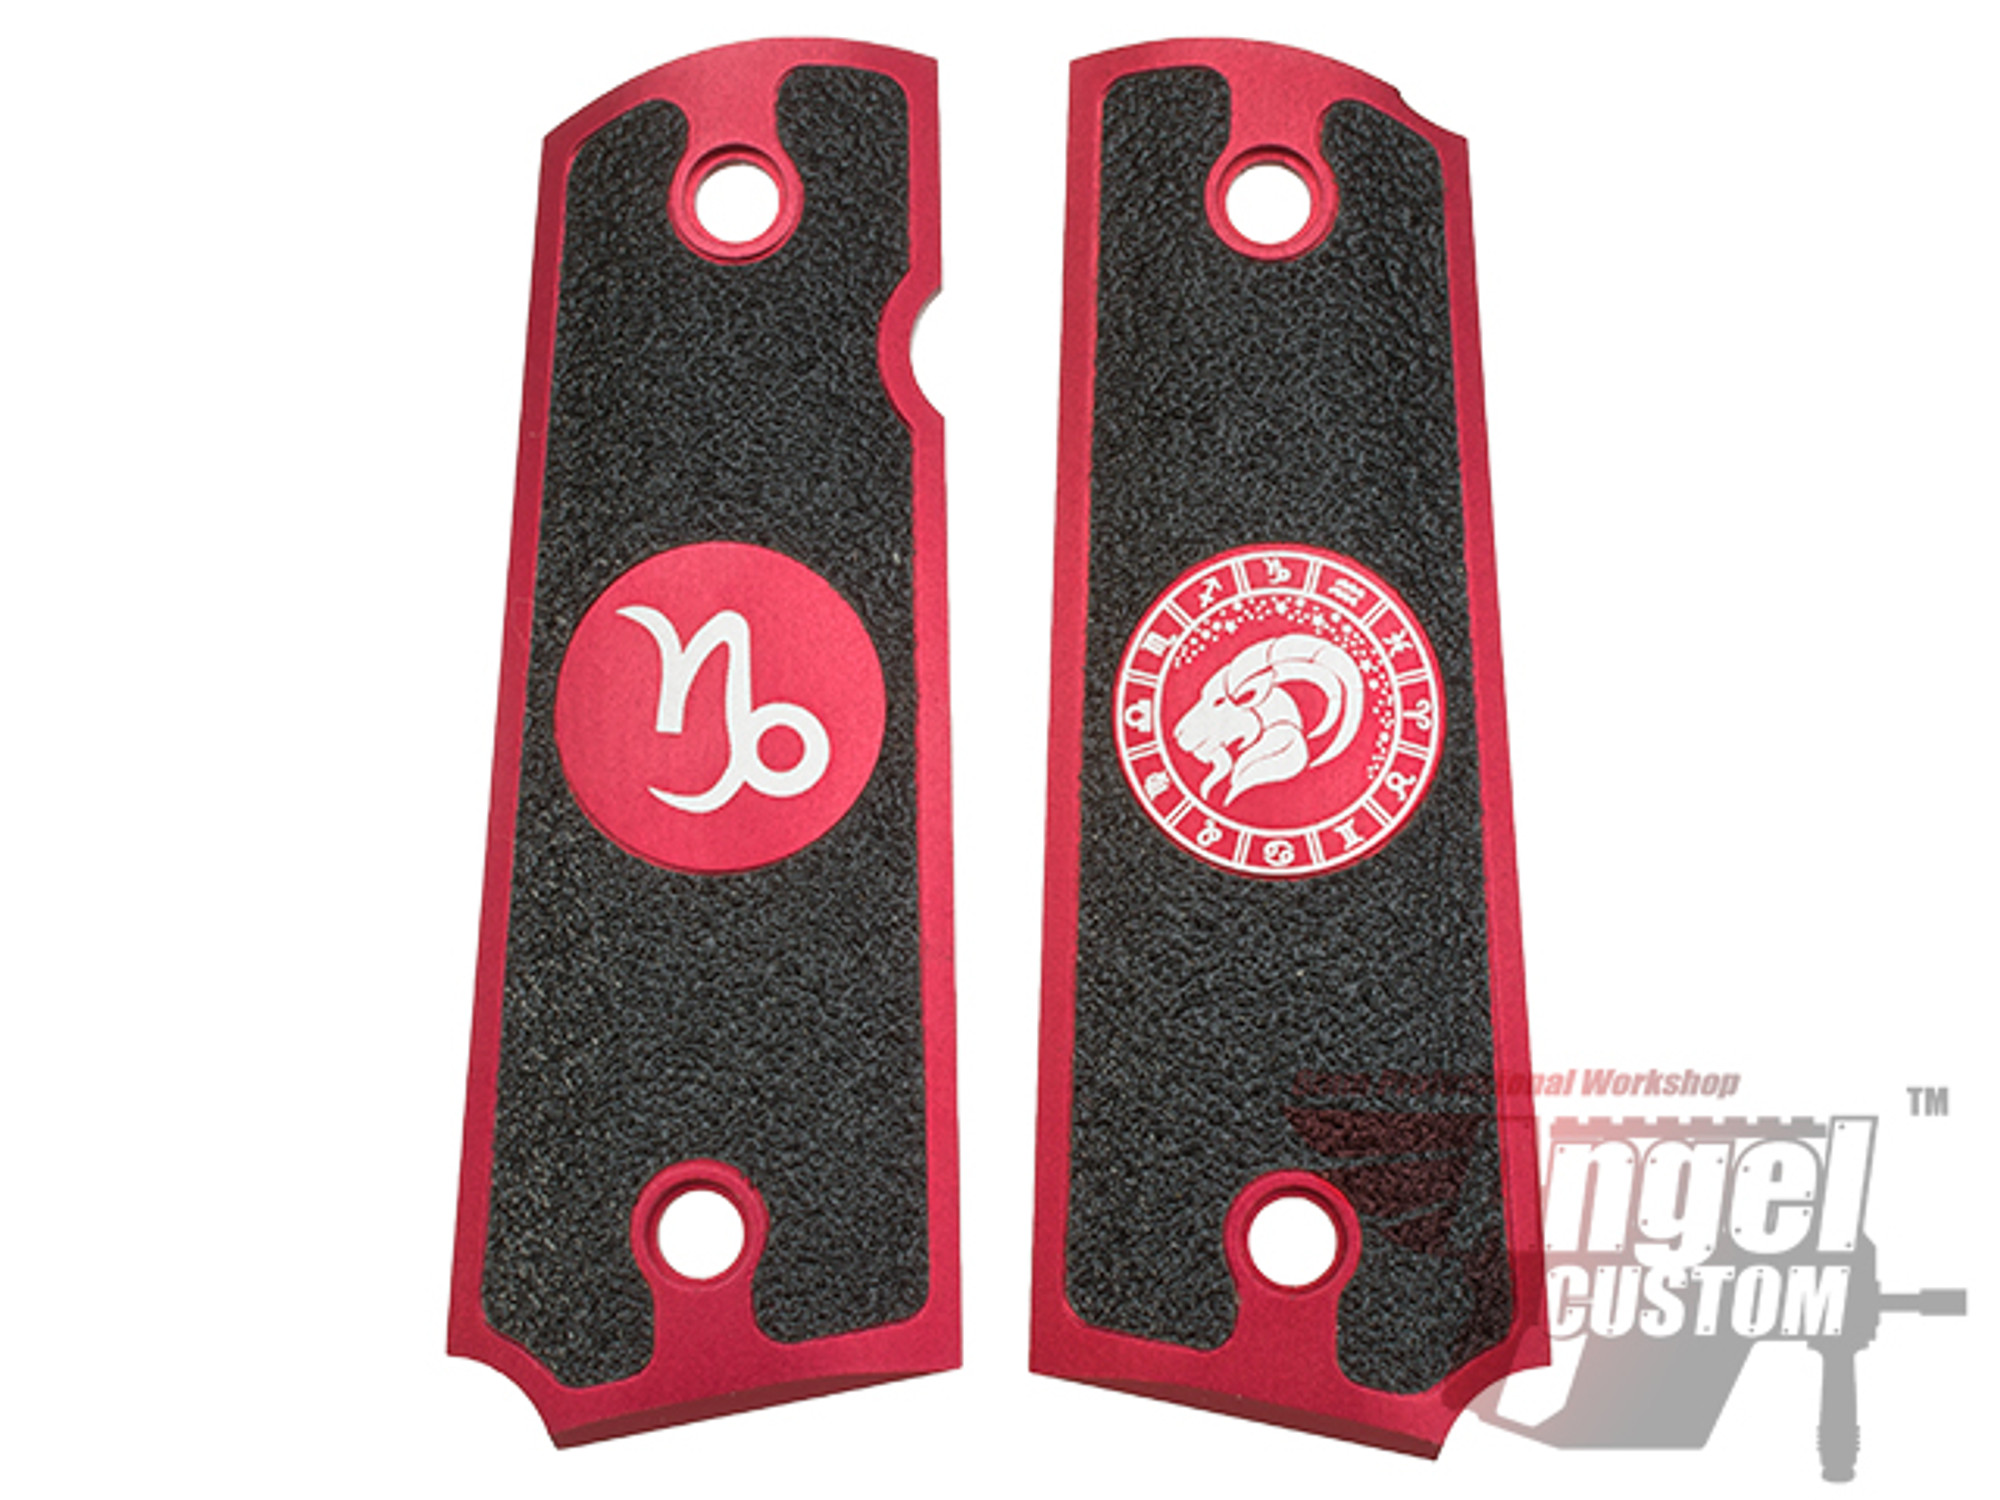 Angel Custom CNC Machined Tac-Glove "Zodiac" Grips for WE-Tech 1911 Series Airsoft Pistols - Capricorn (Red)